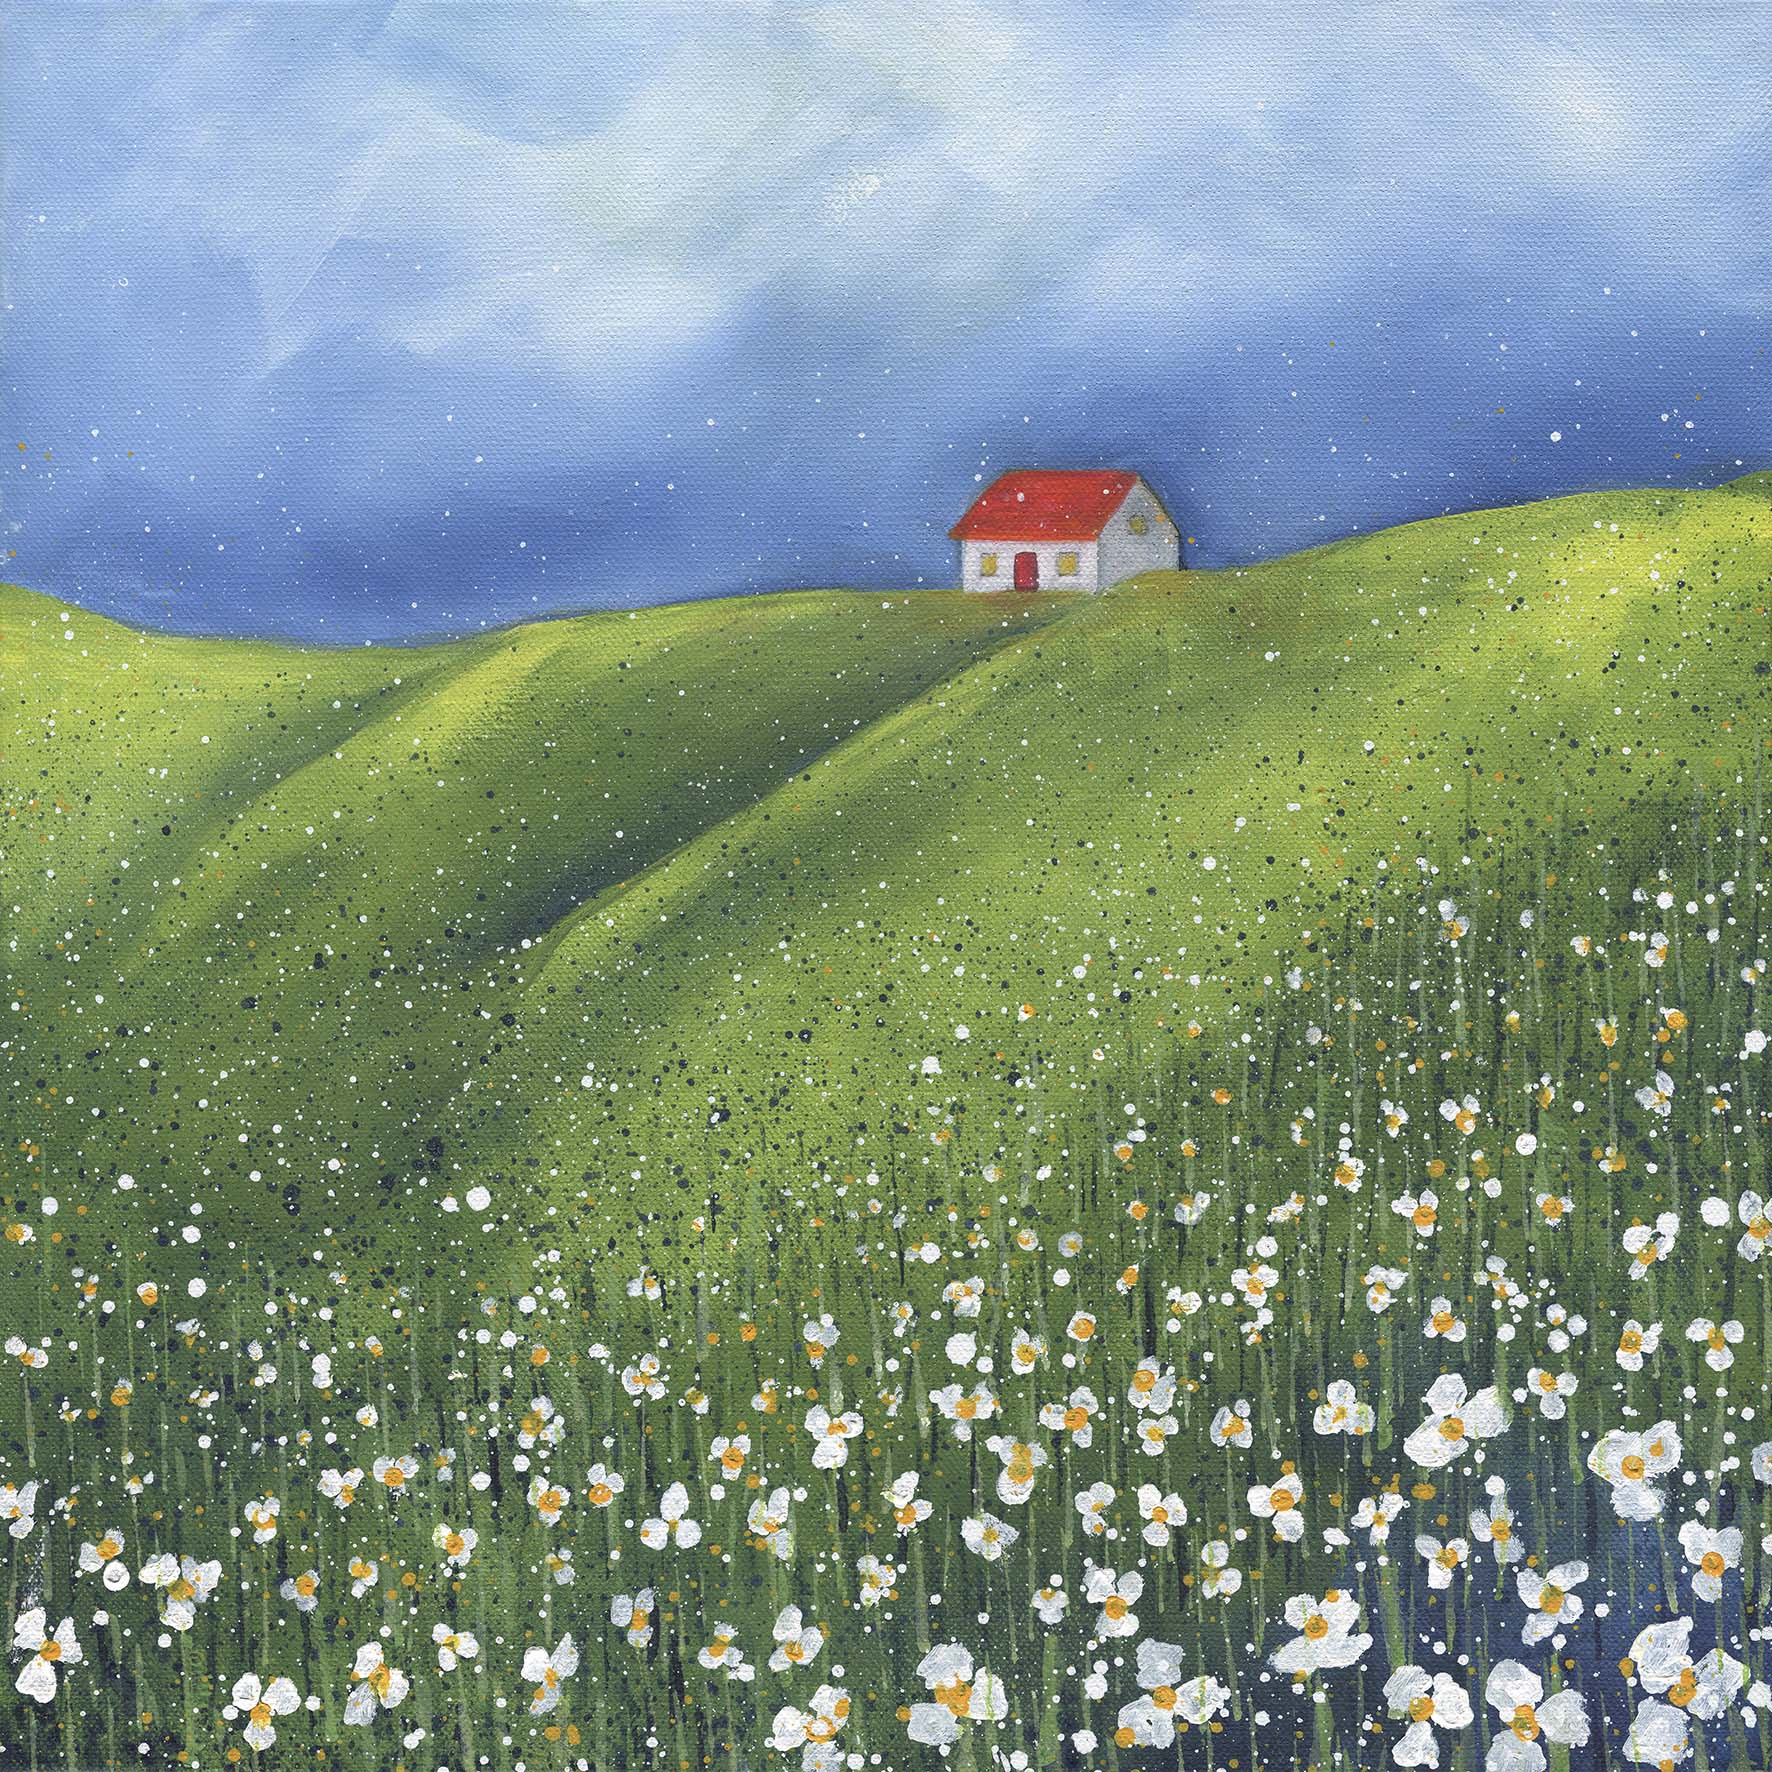 Cottage in the Daisies